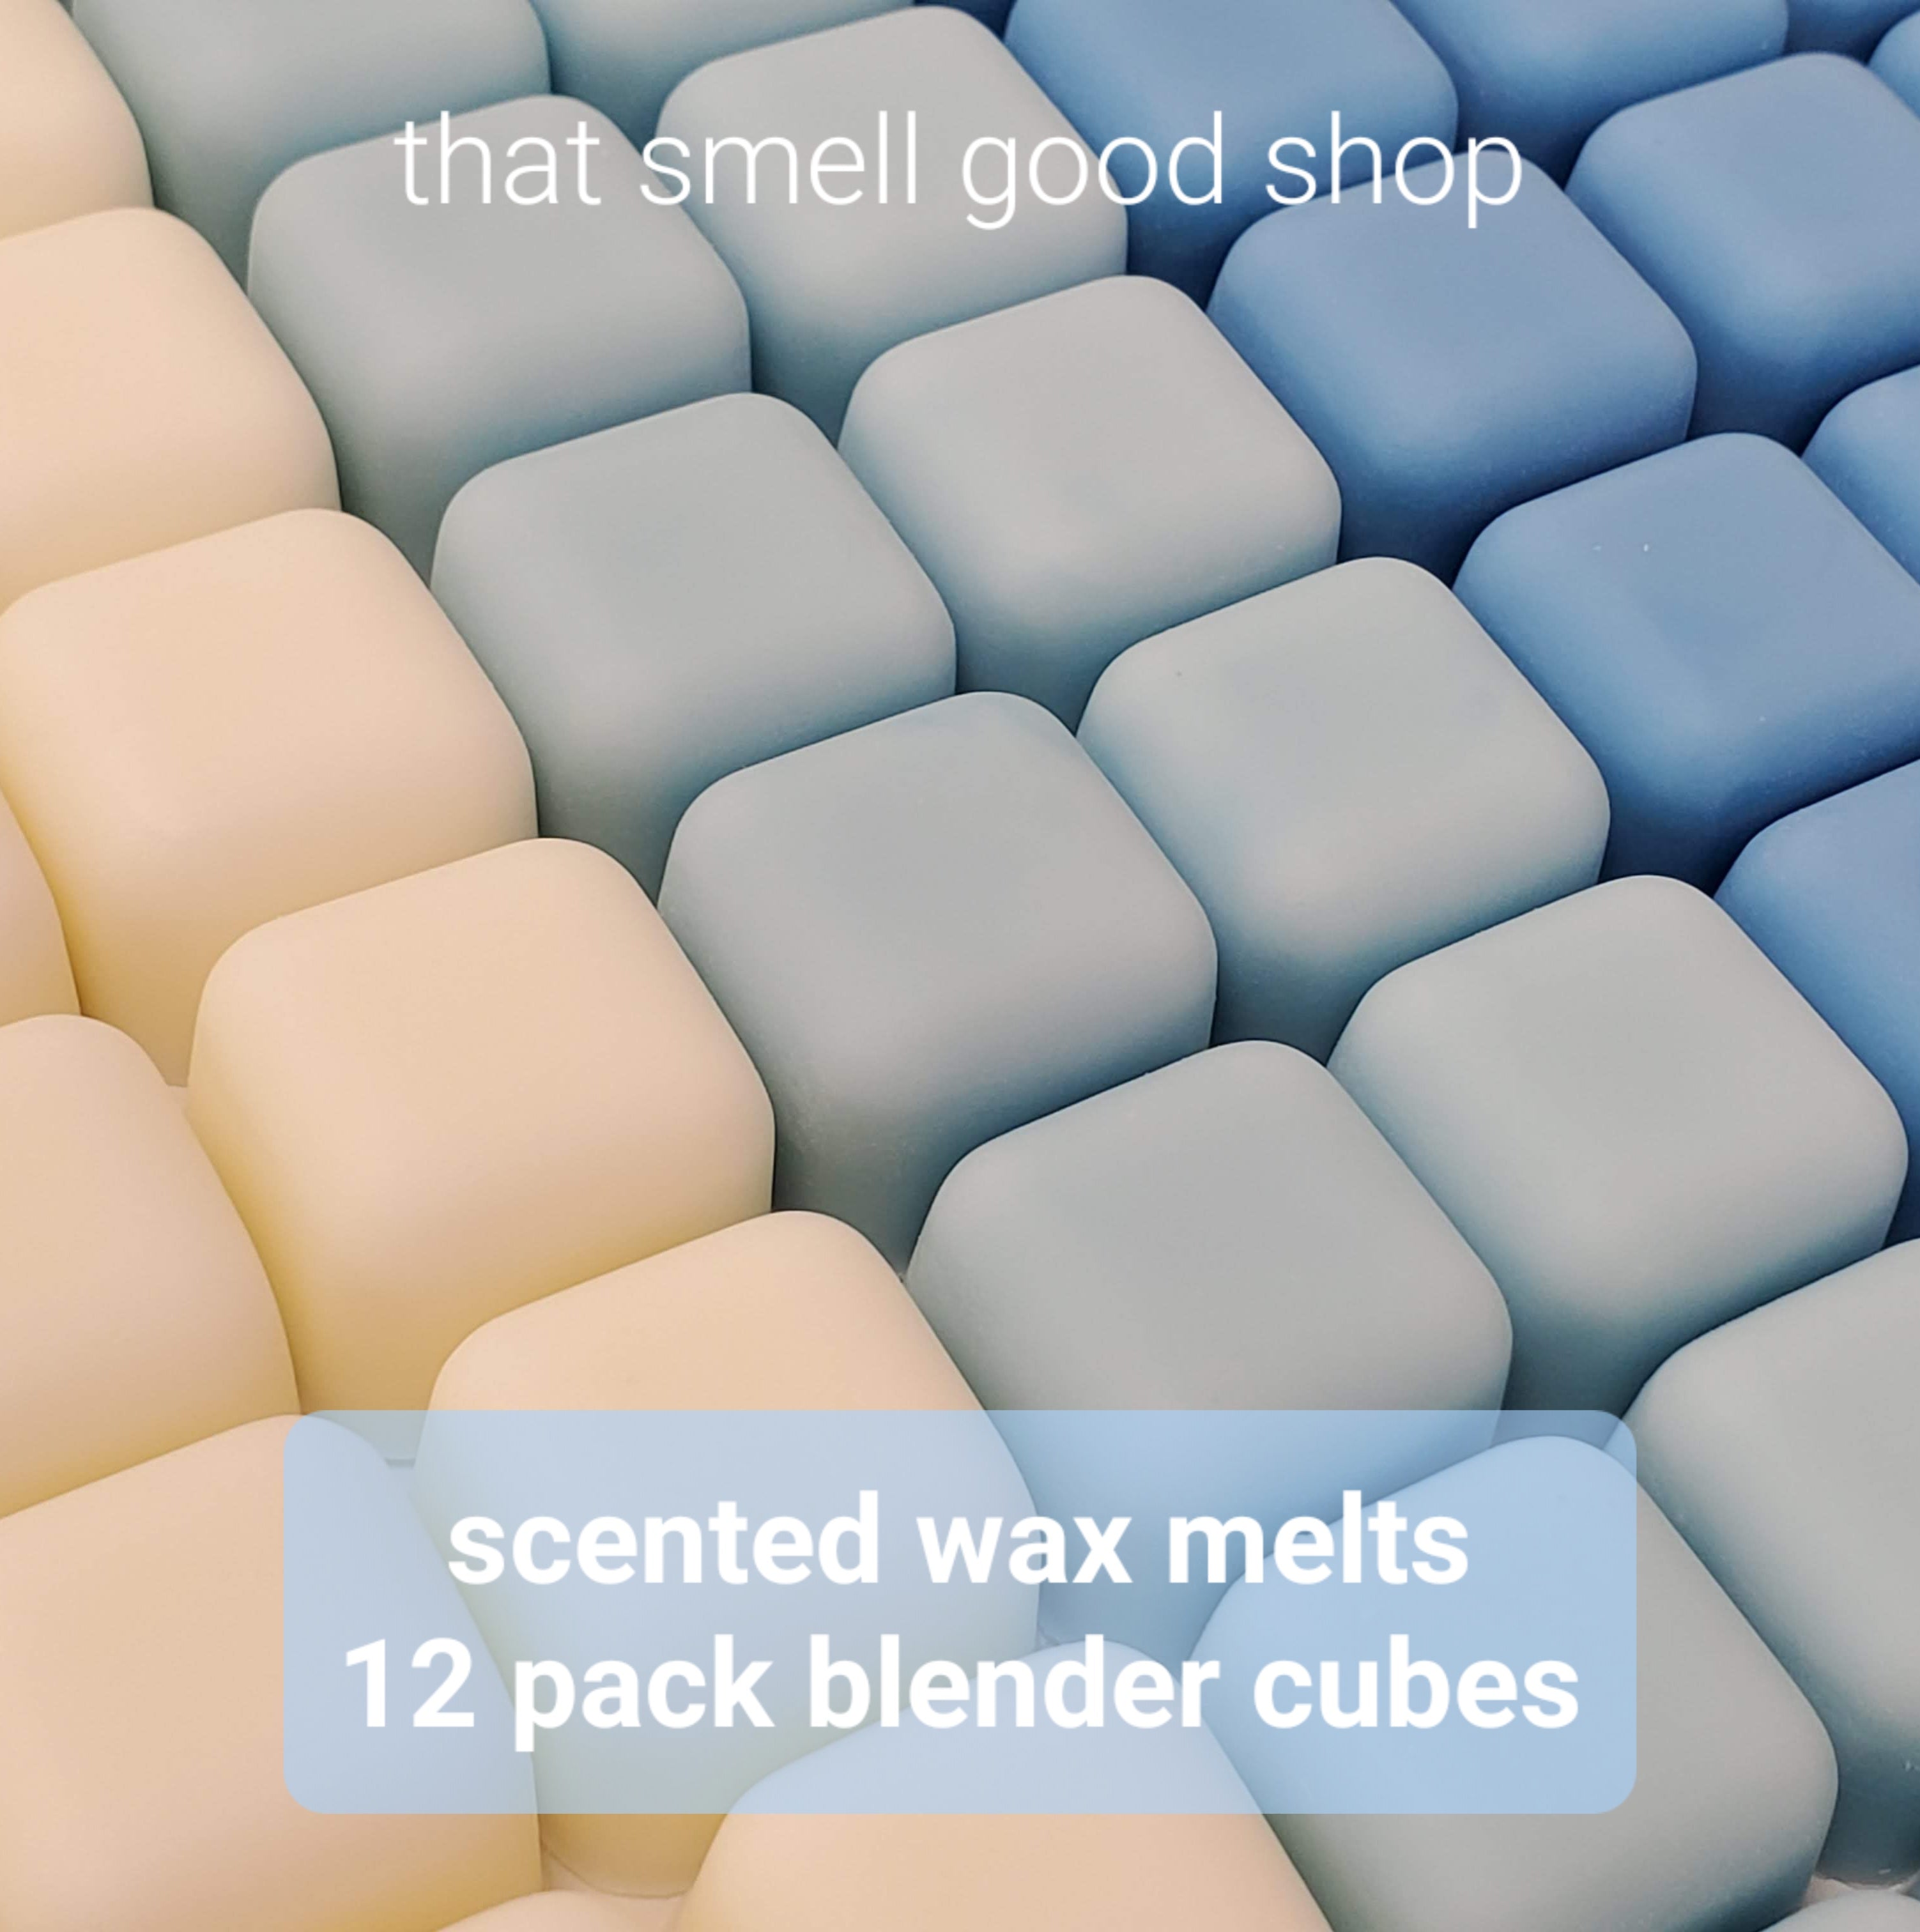  Scented Wax Melts, Baby Powder Scent, STRONGLY SCENTED WAX  MELTS, Wax Melts Wax Cubes Strong Scent, HANDMADE, Candle Melts Wax Cubes, USA Made